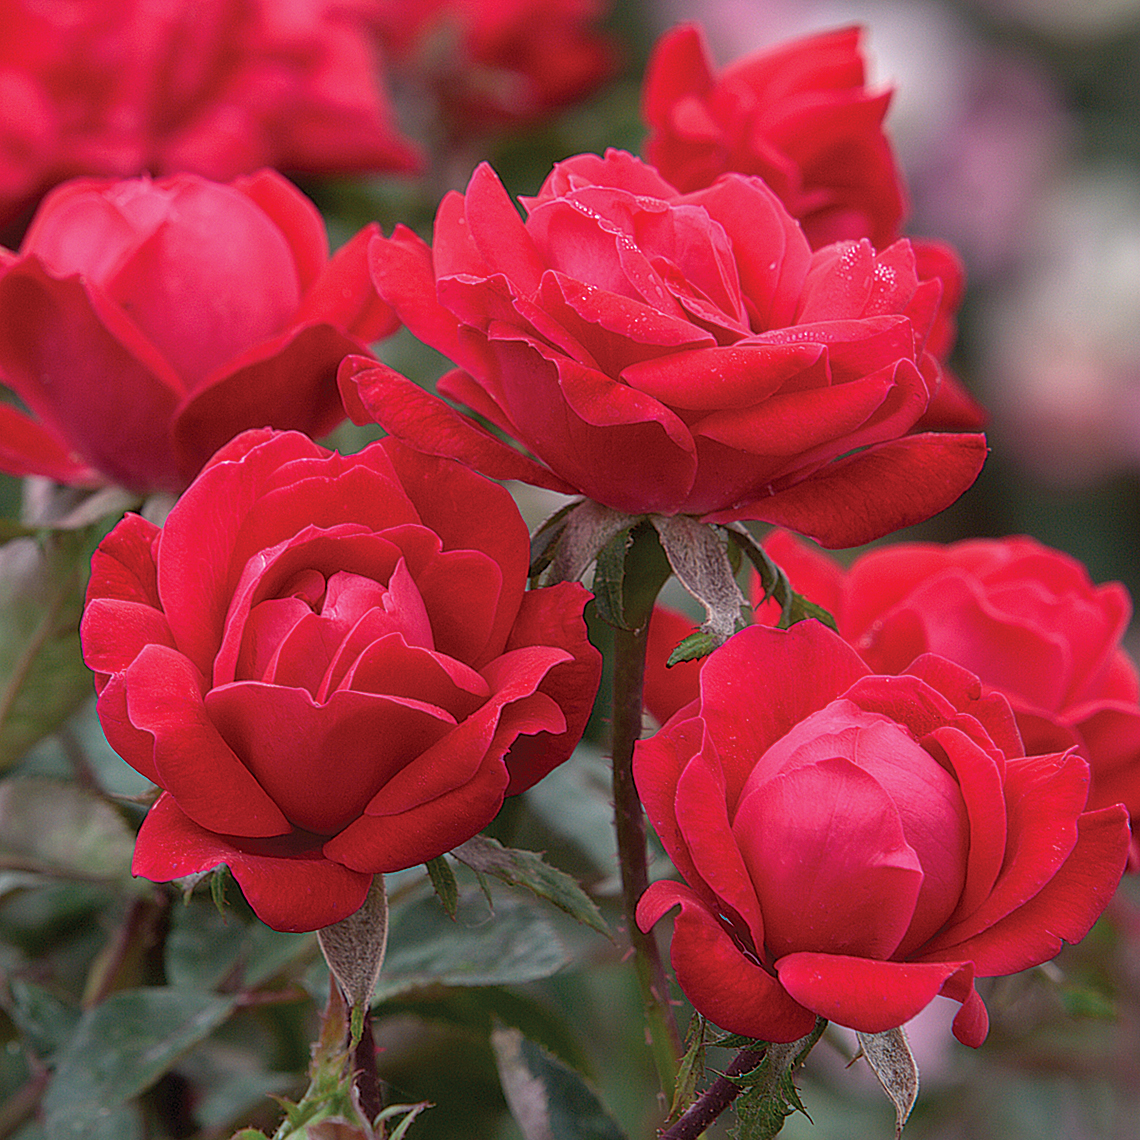 Five bright red Double Knock Out Rosa flowers